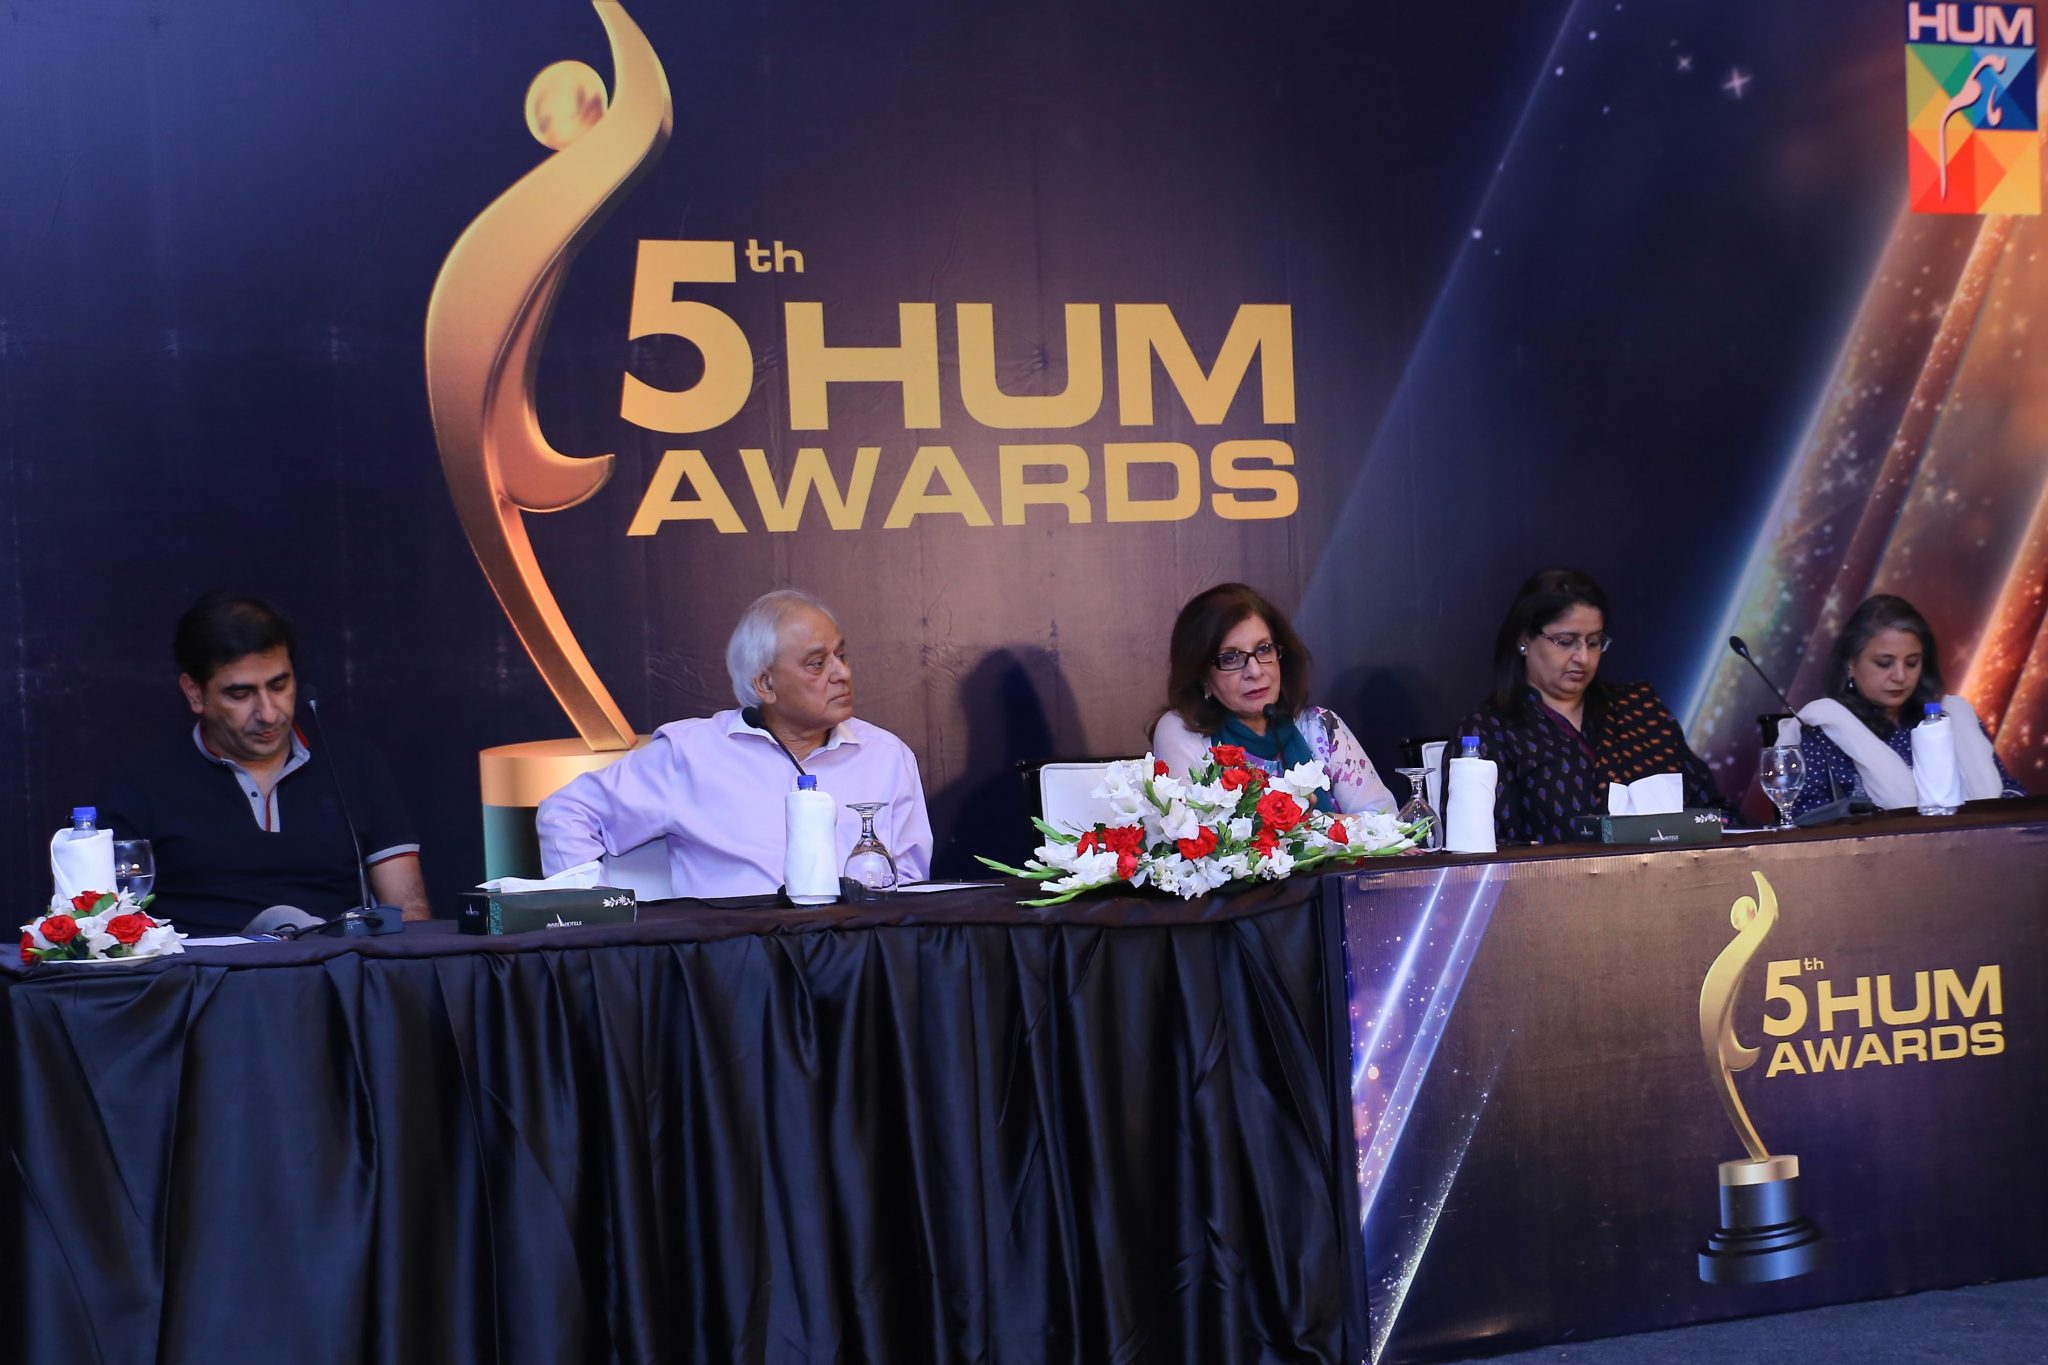 Pakistan’s Cultural Capital to Host the 5th HUM Awards 2017 (2)